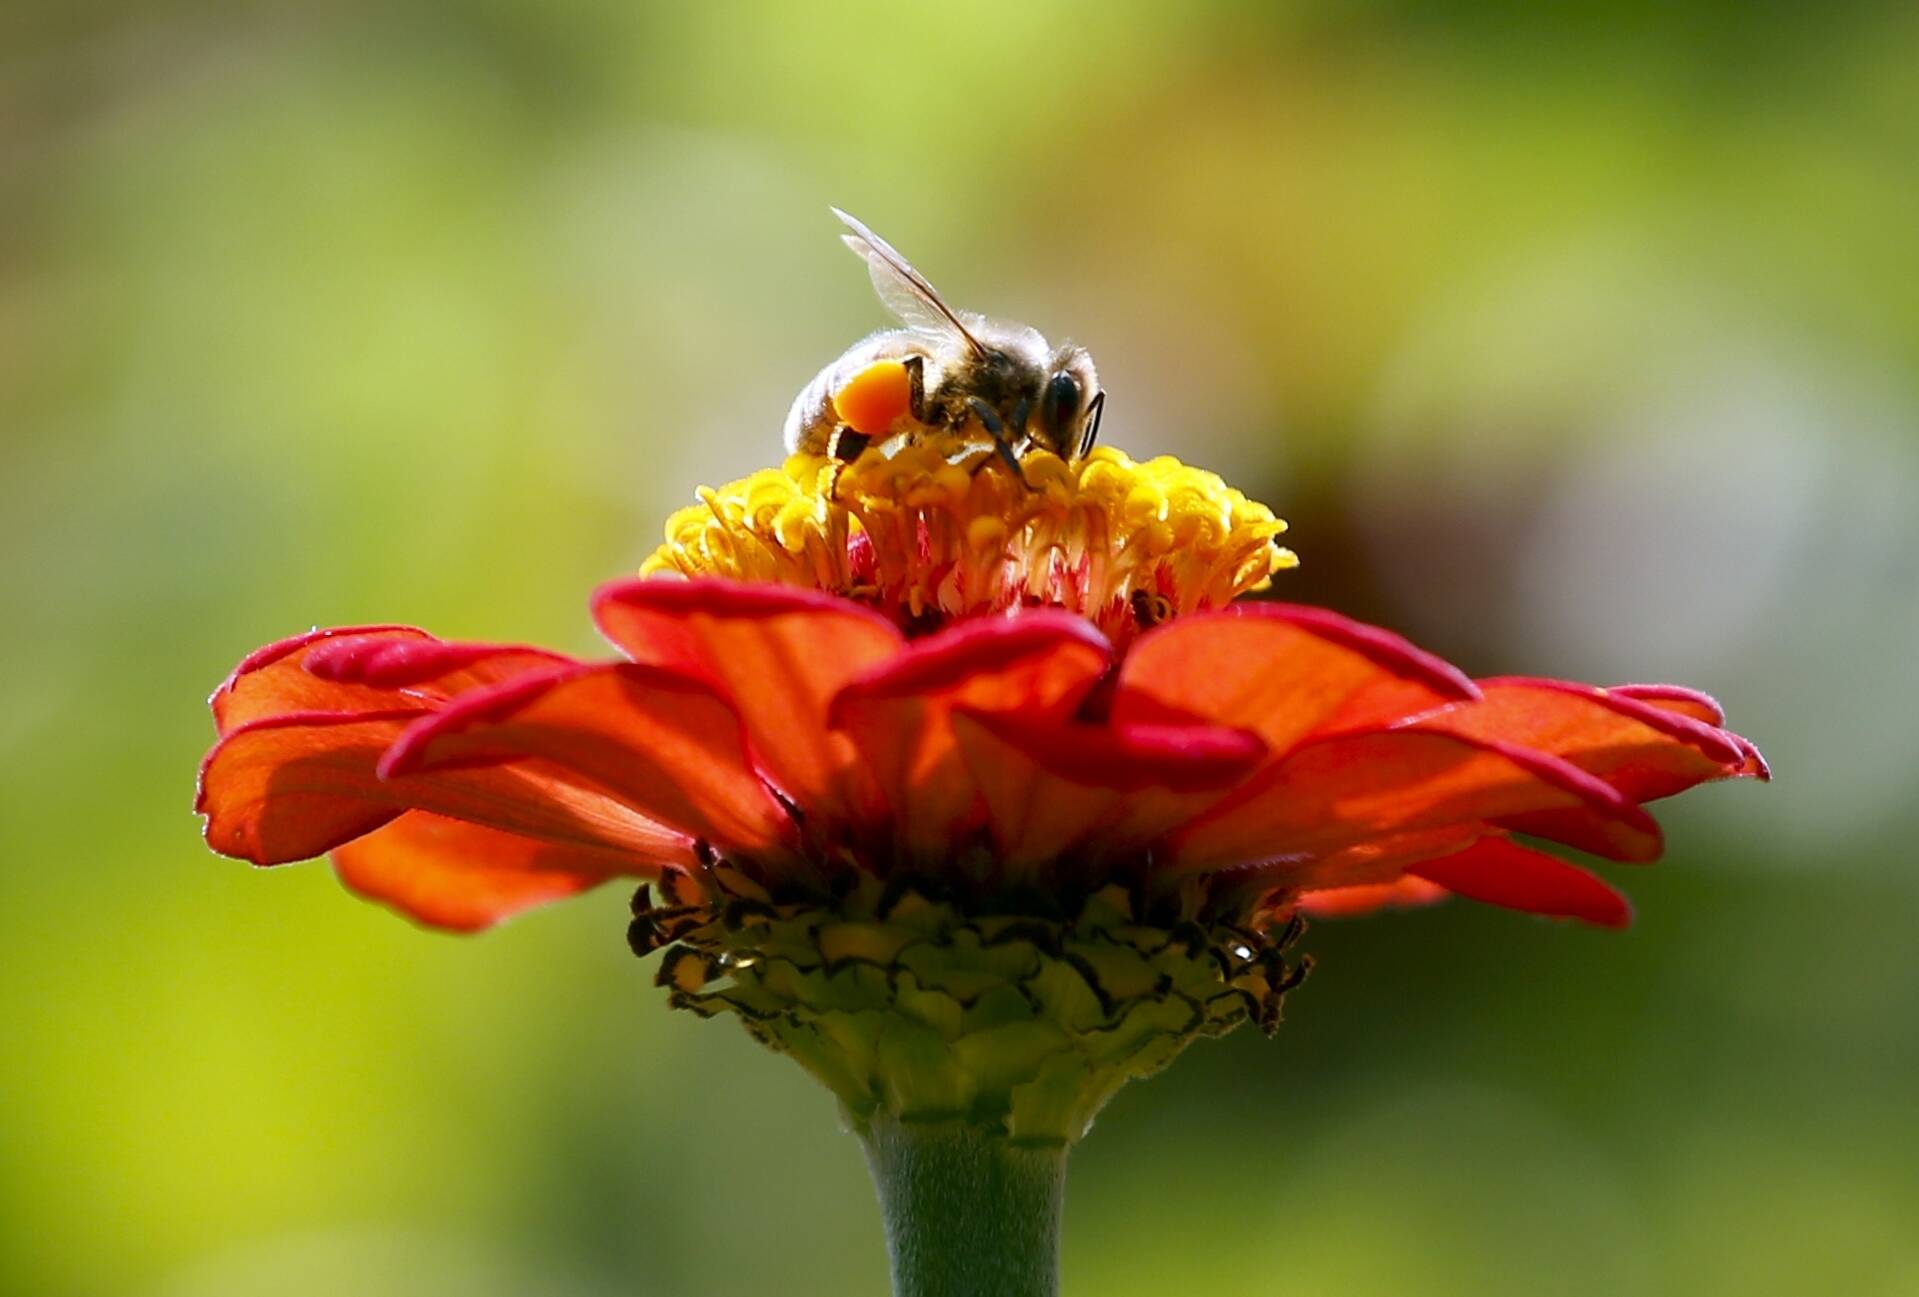 In this Sept. 1, 2015, photo, a honeybee works atop gift zinnia in Accord, N.Y. A shipment of honeybees bound from California to Alaska died after an airline re-routed them through Atlanta, then left them to sit on the tarmac during hot weather. Delta Air Lines said Friday, April 29, 2022, it is making changes to prevent a repeat of what happened last weekend. (AP Photo / Mike Groll)